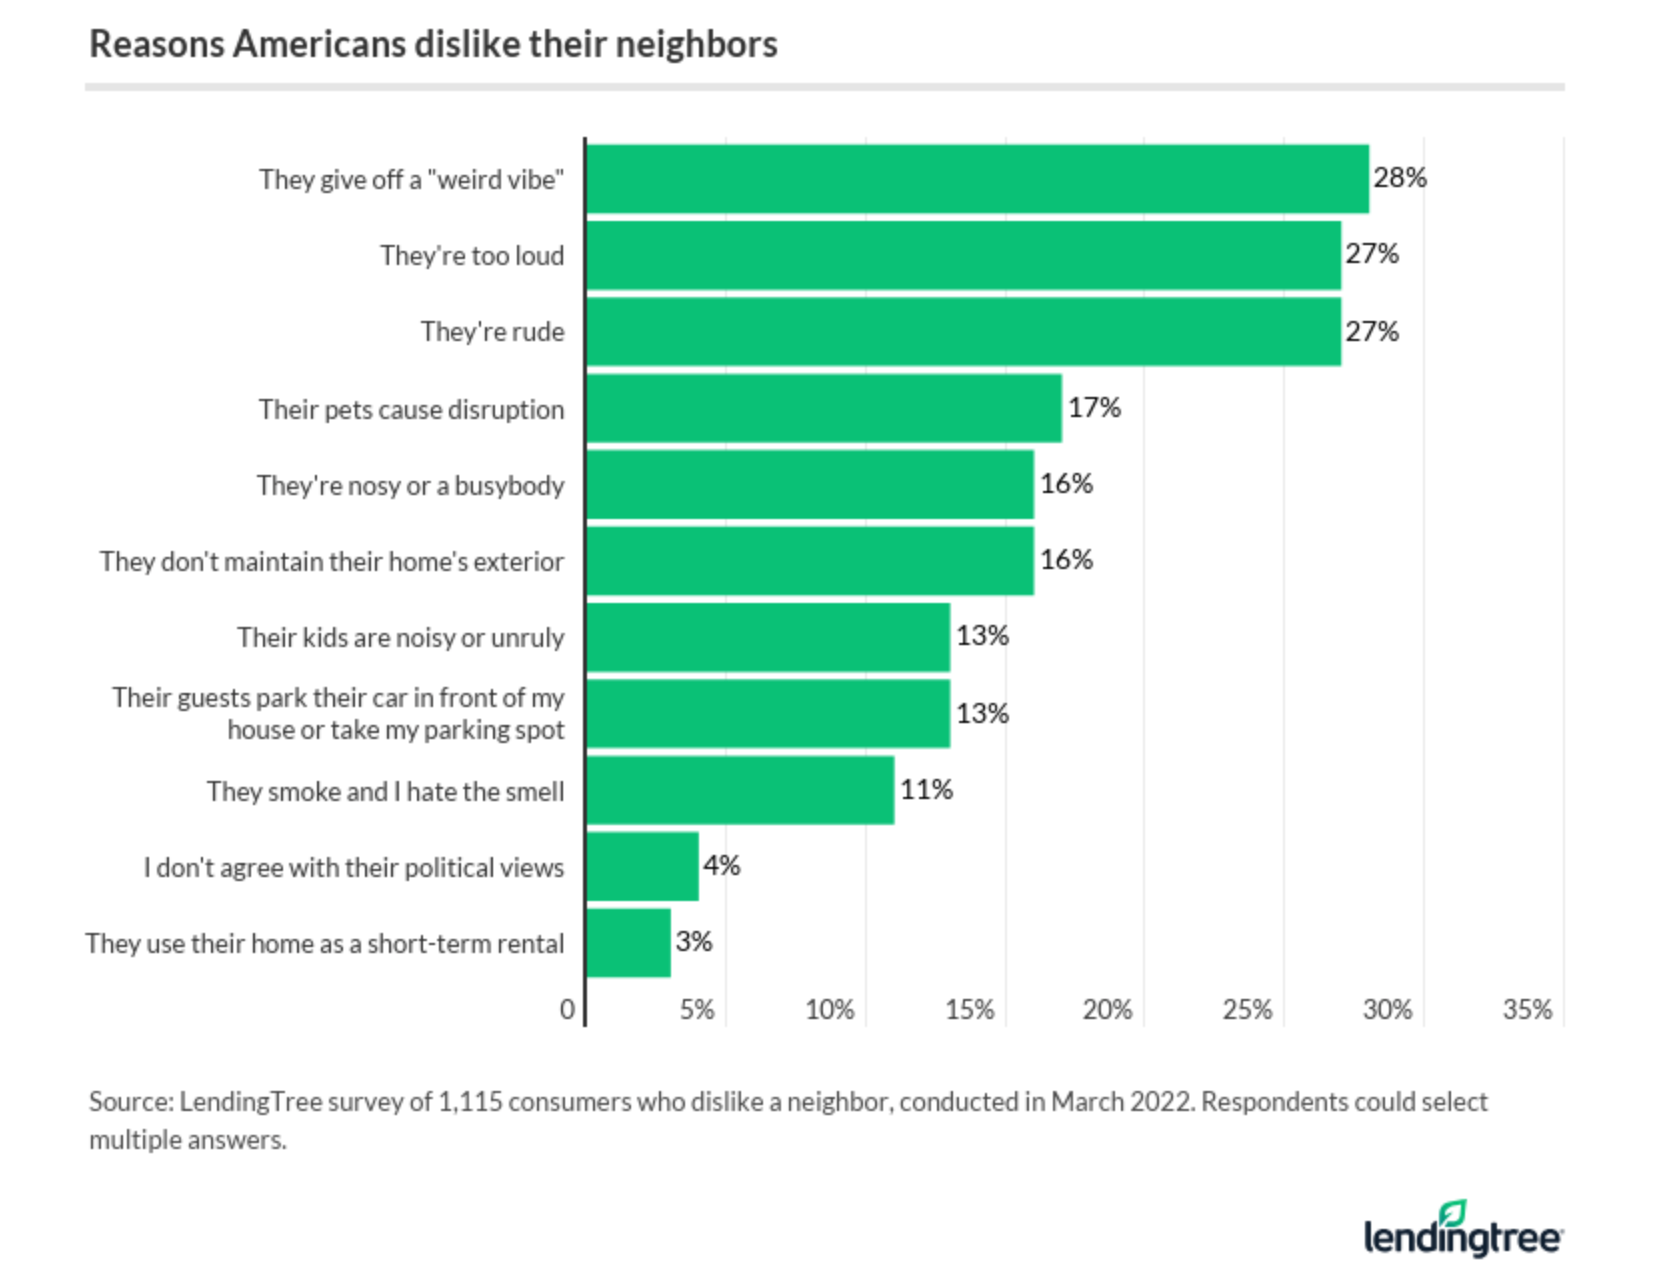 A bar chart showing the common reasons Americans don't like their neighbors.